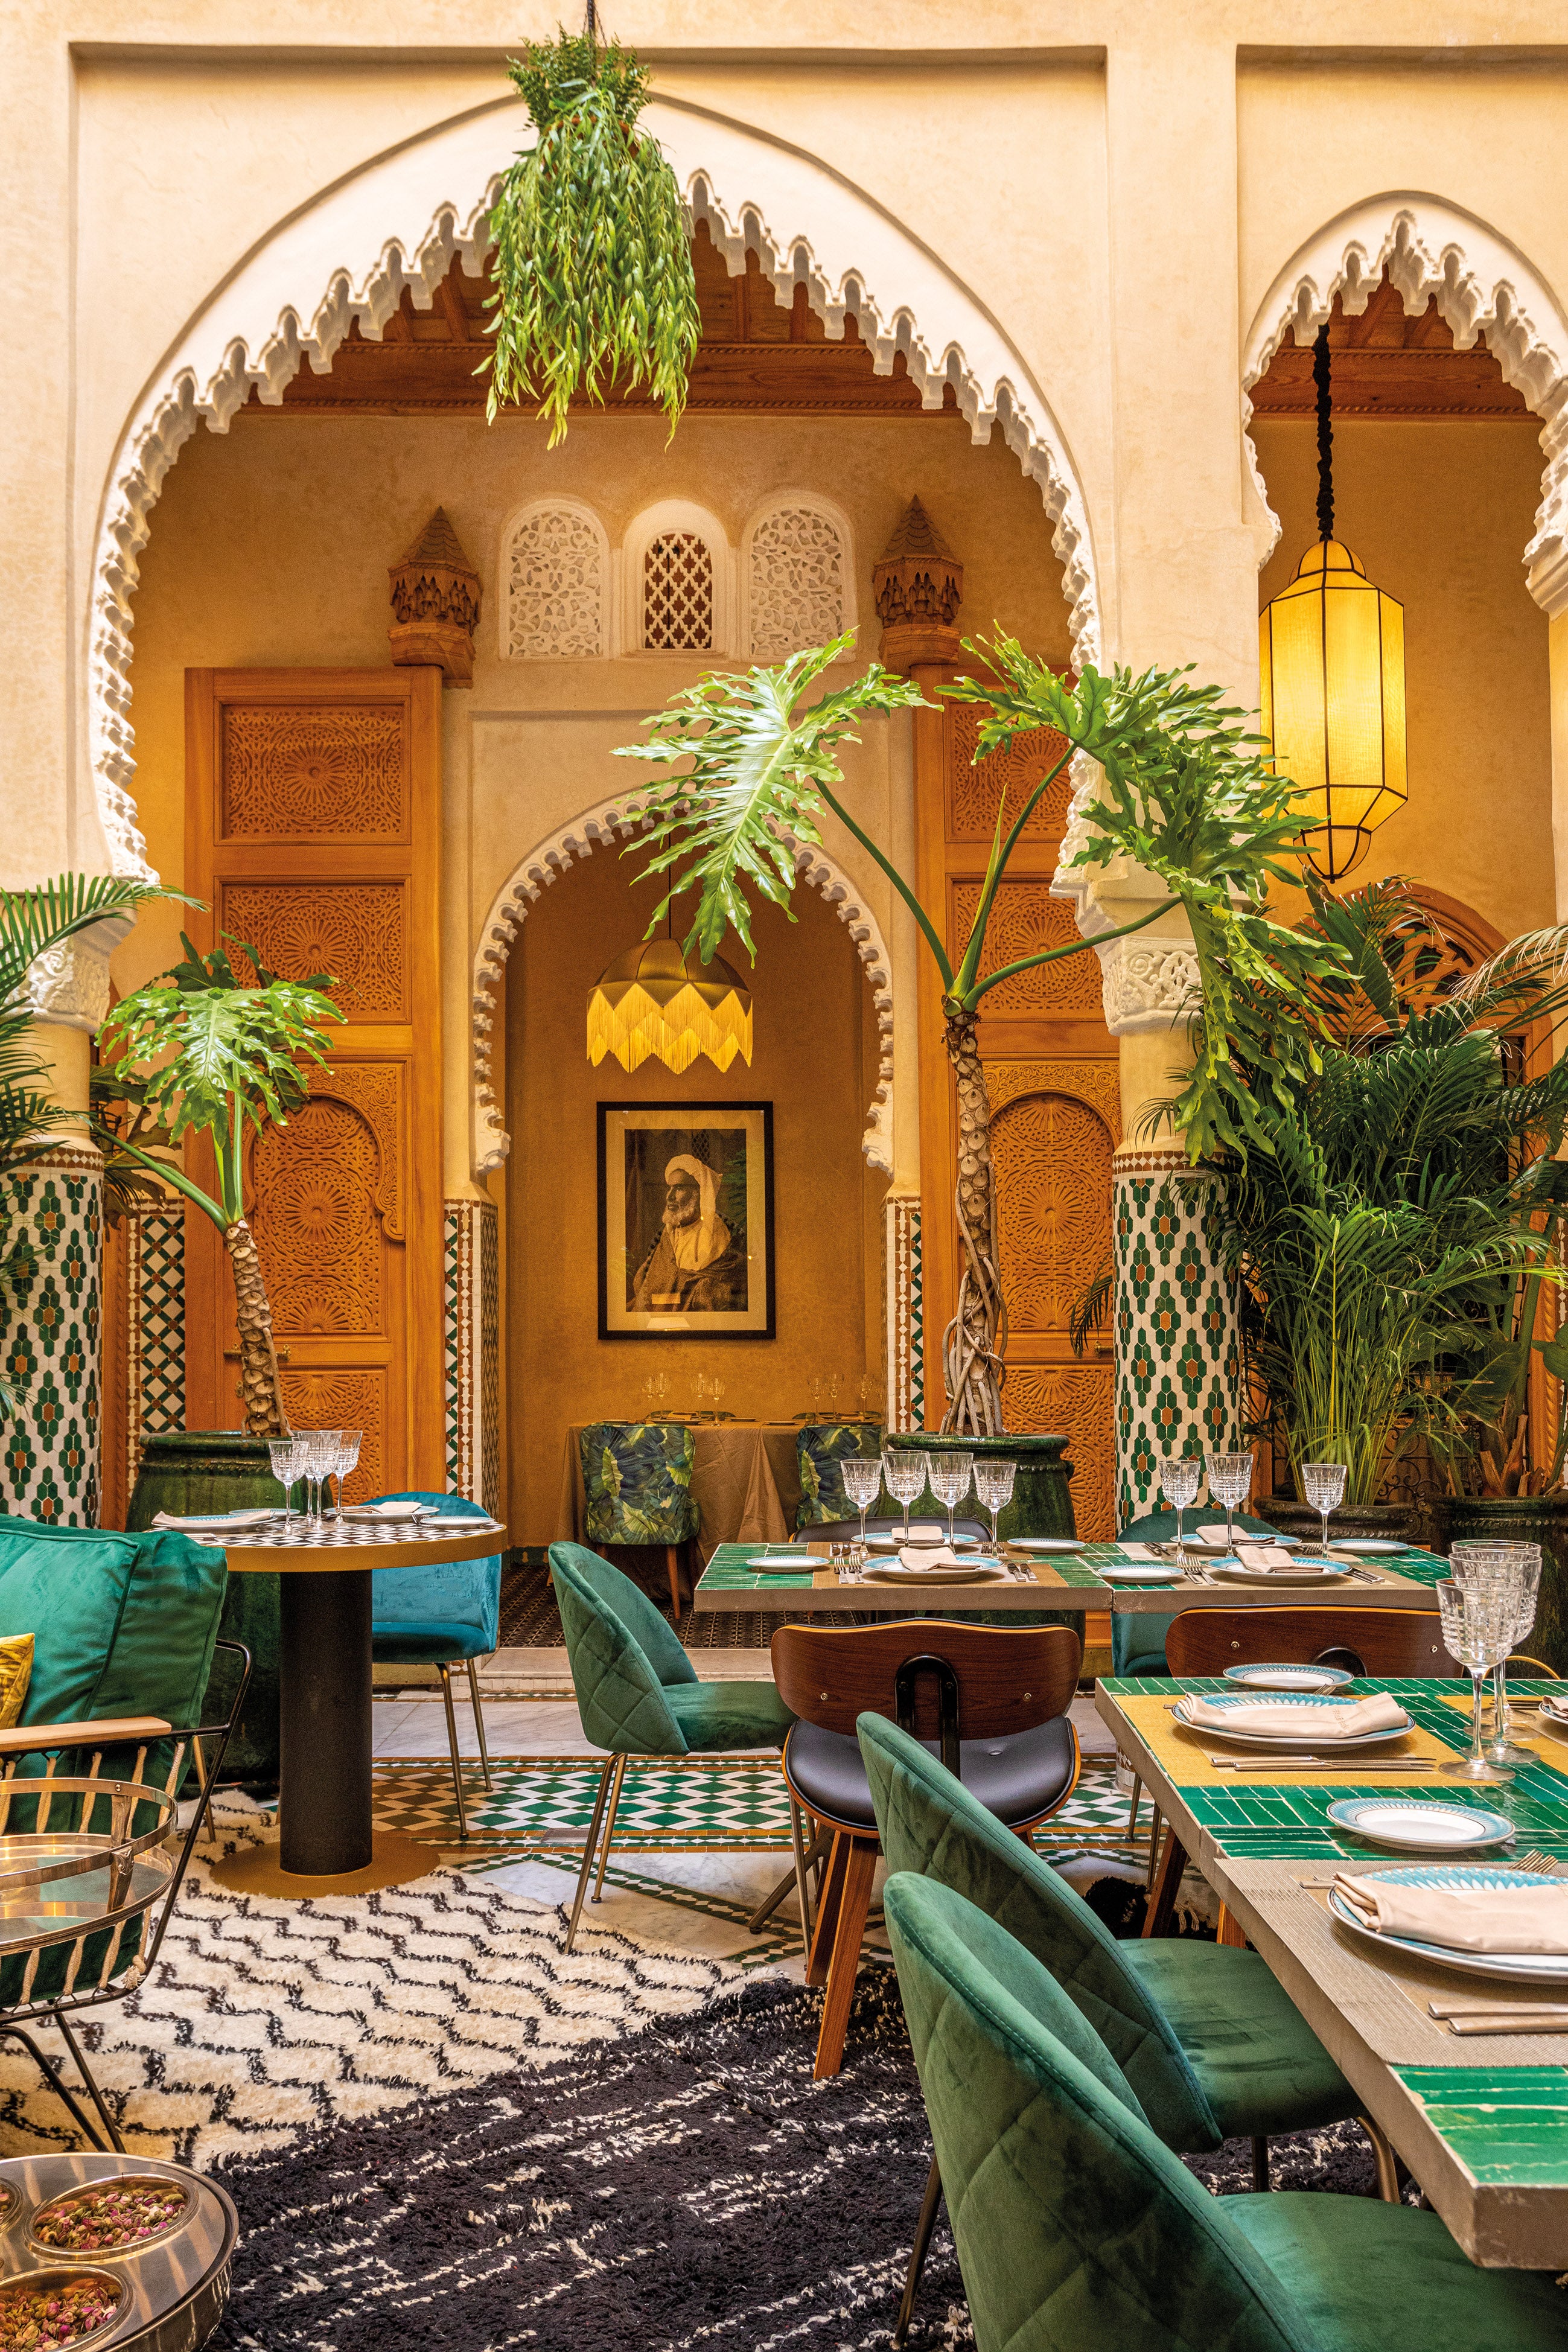 On the fringes of the old Medina lies this restaurant in the courtyard of a converted riad